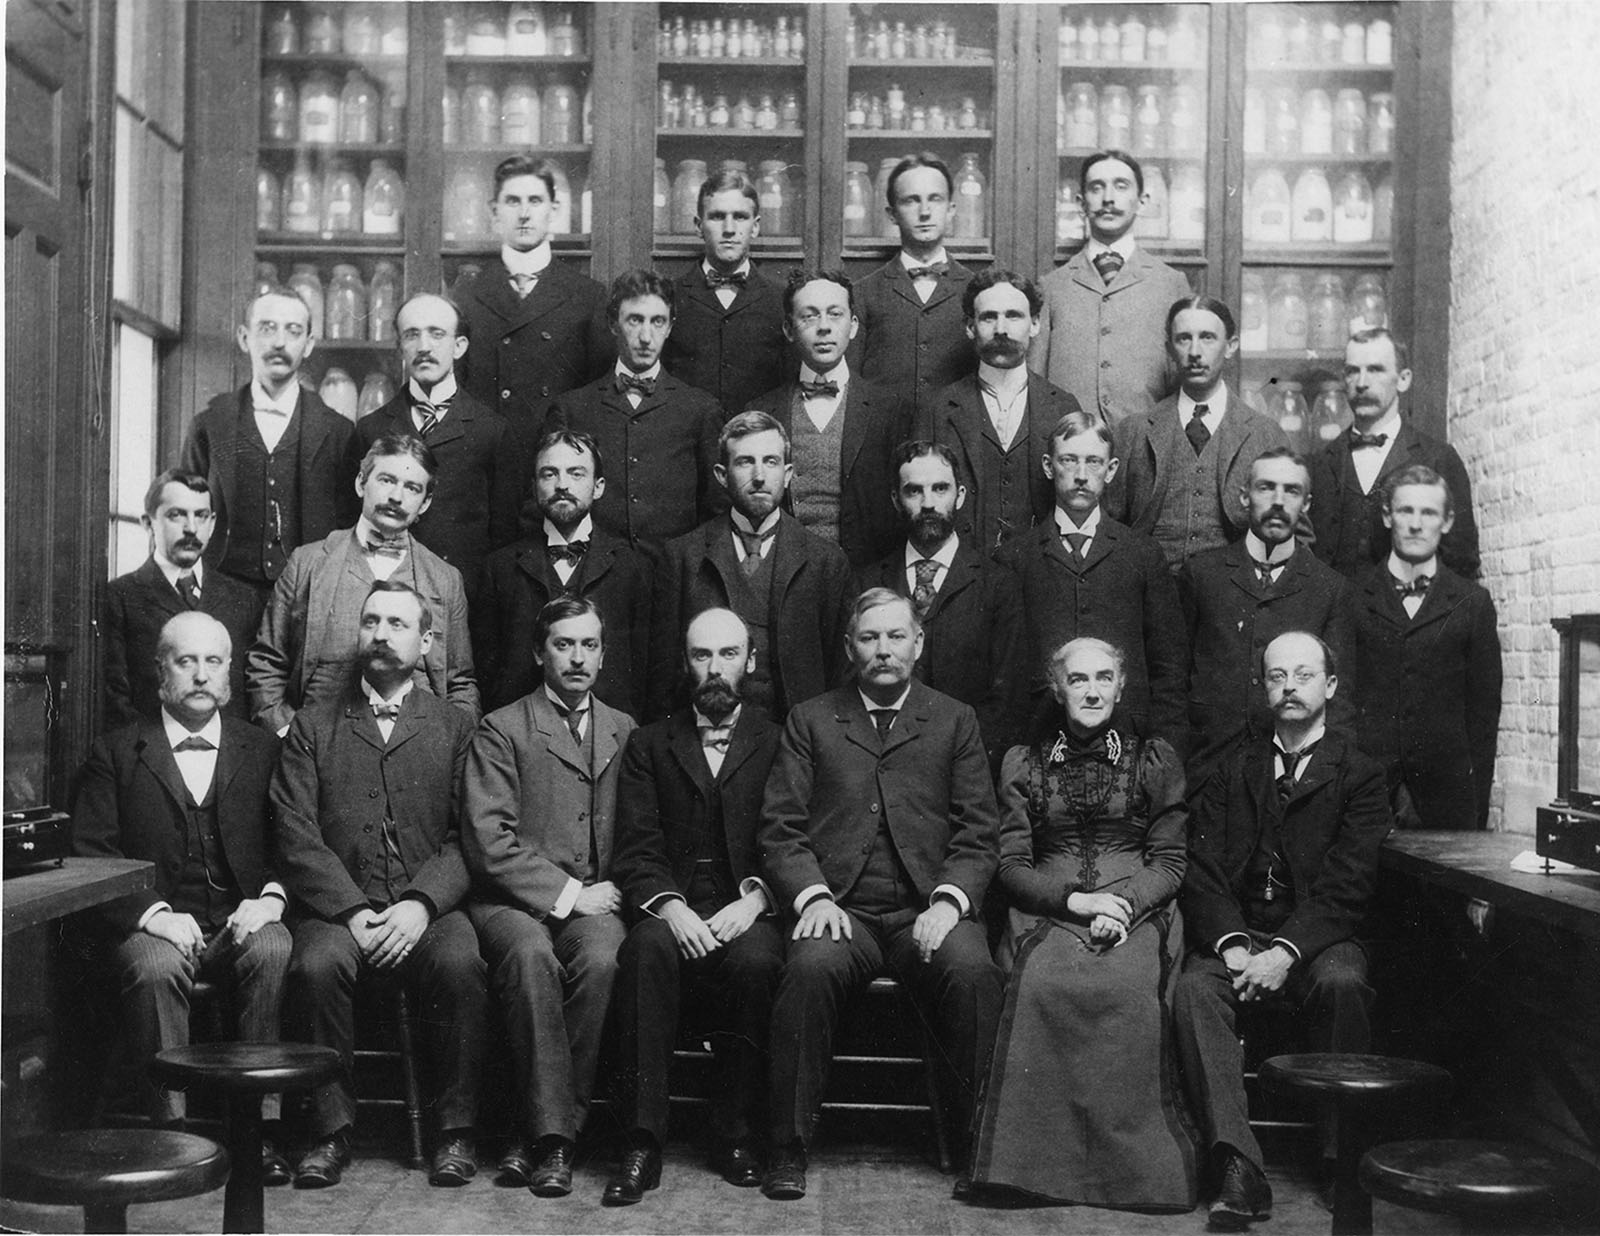 Ellen Swallow Richards and the staff of the Massachusetts Institute of Technology’s Chemistry Department. Richards is the only woman in the photo. There are 25 men. All of the people photographed are white. Richards is seated in the first of four rows, and is the second figure from the right. 